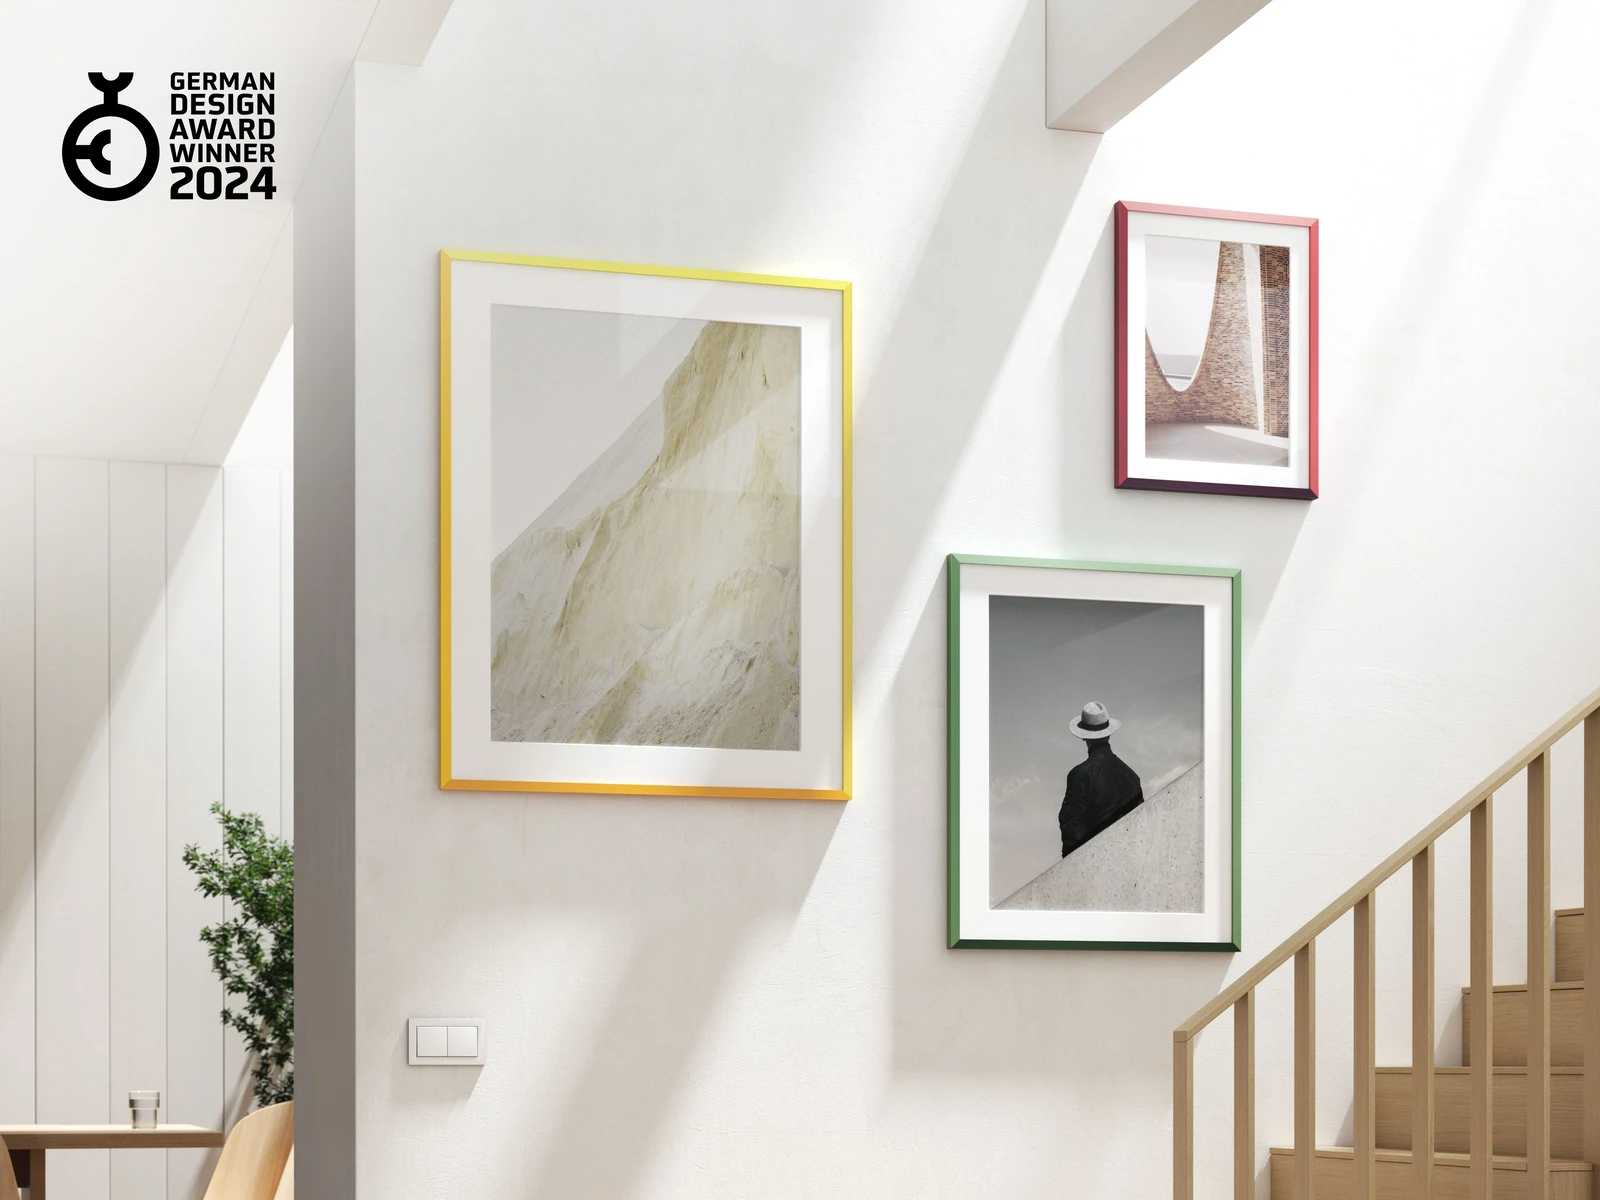 Three design edition frames, one of each color, hanging on a wall.